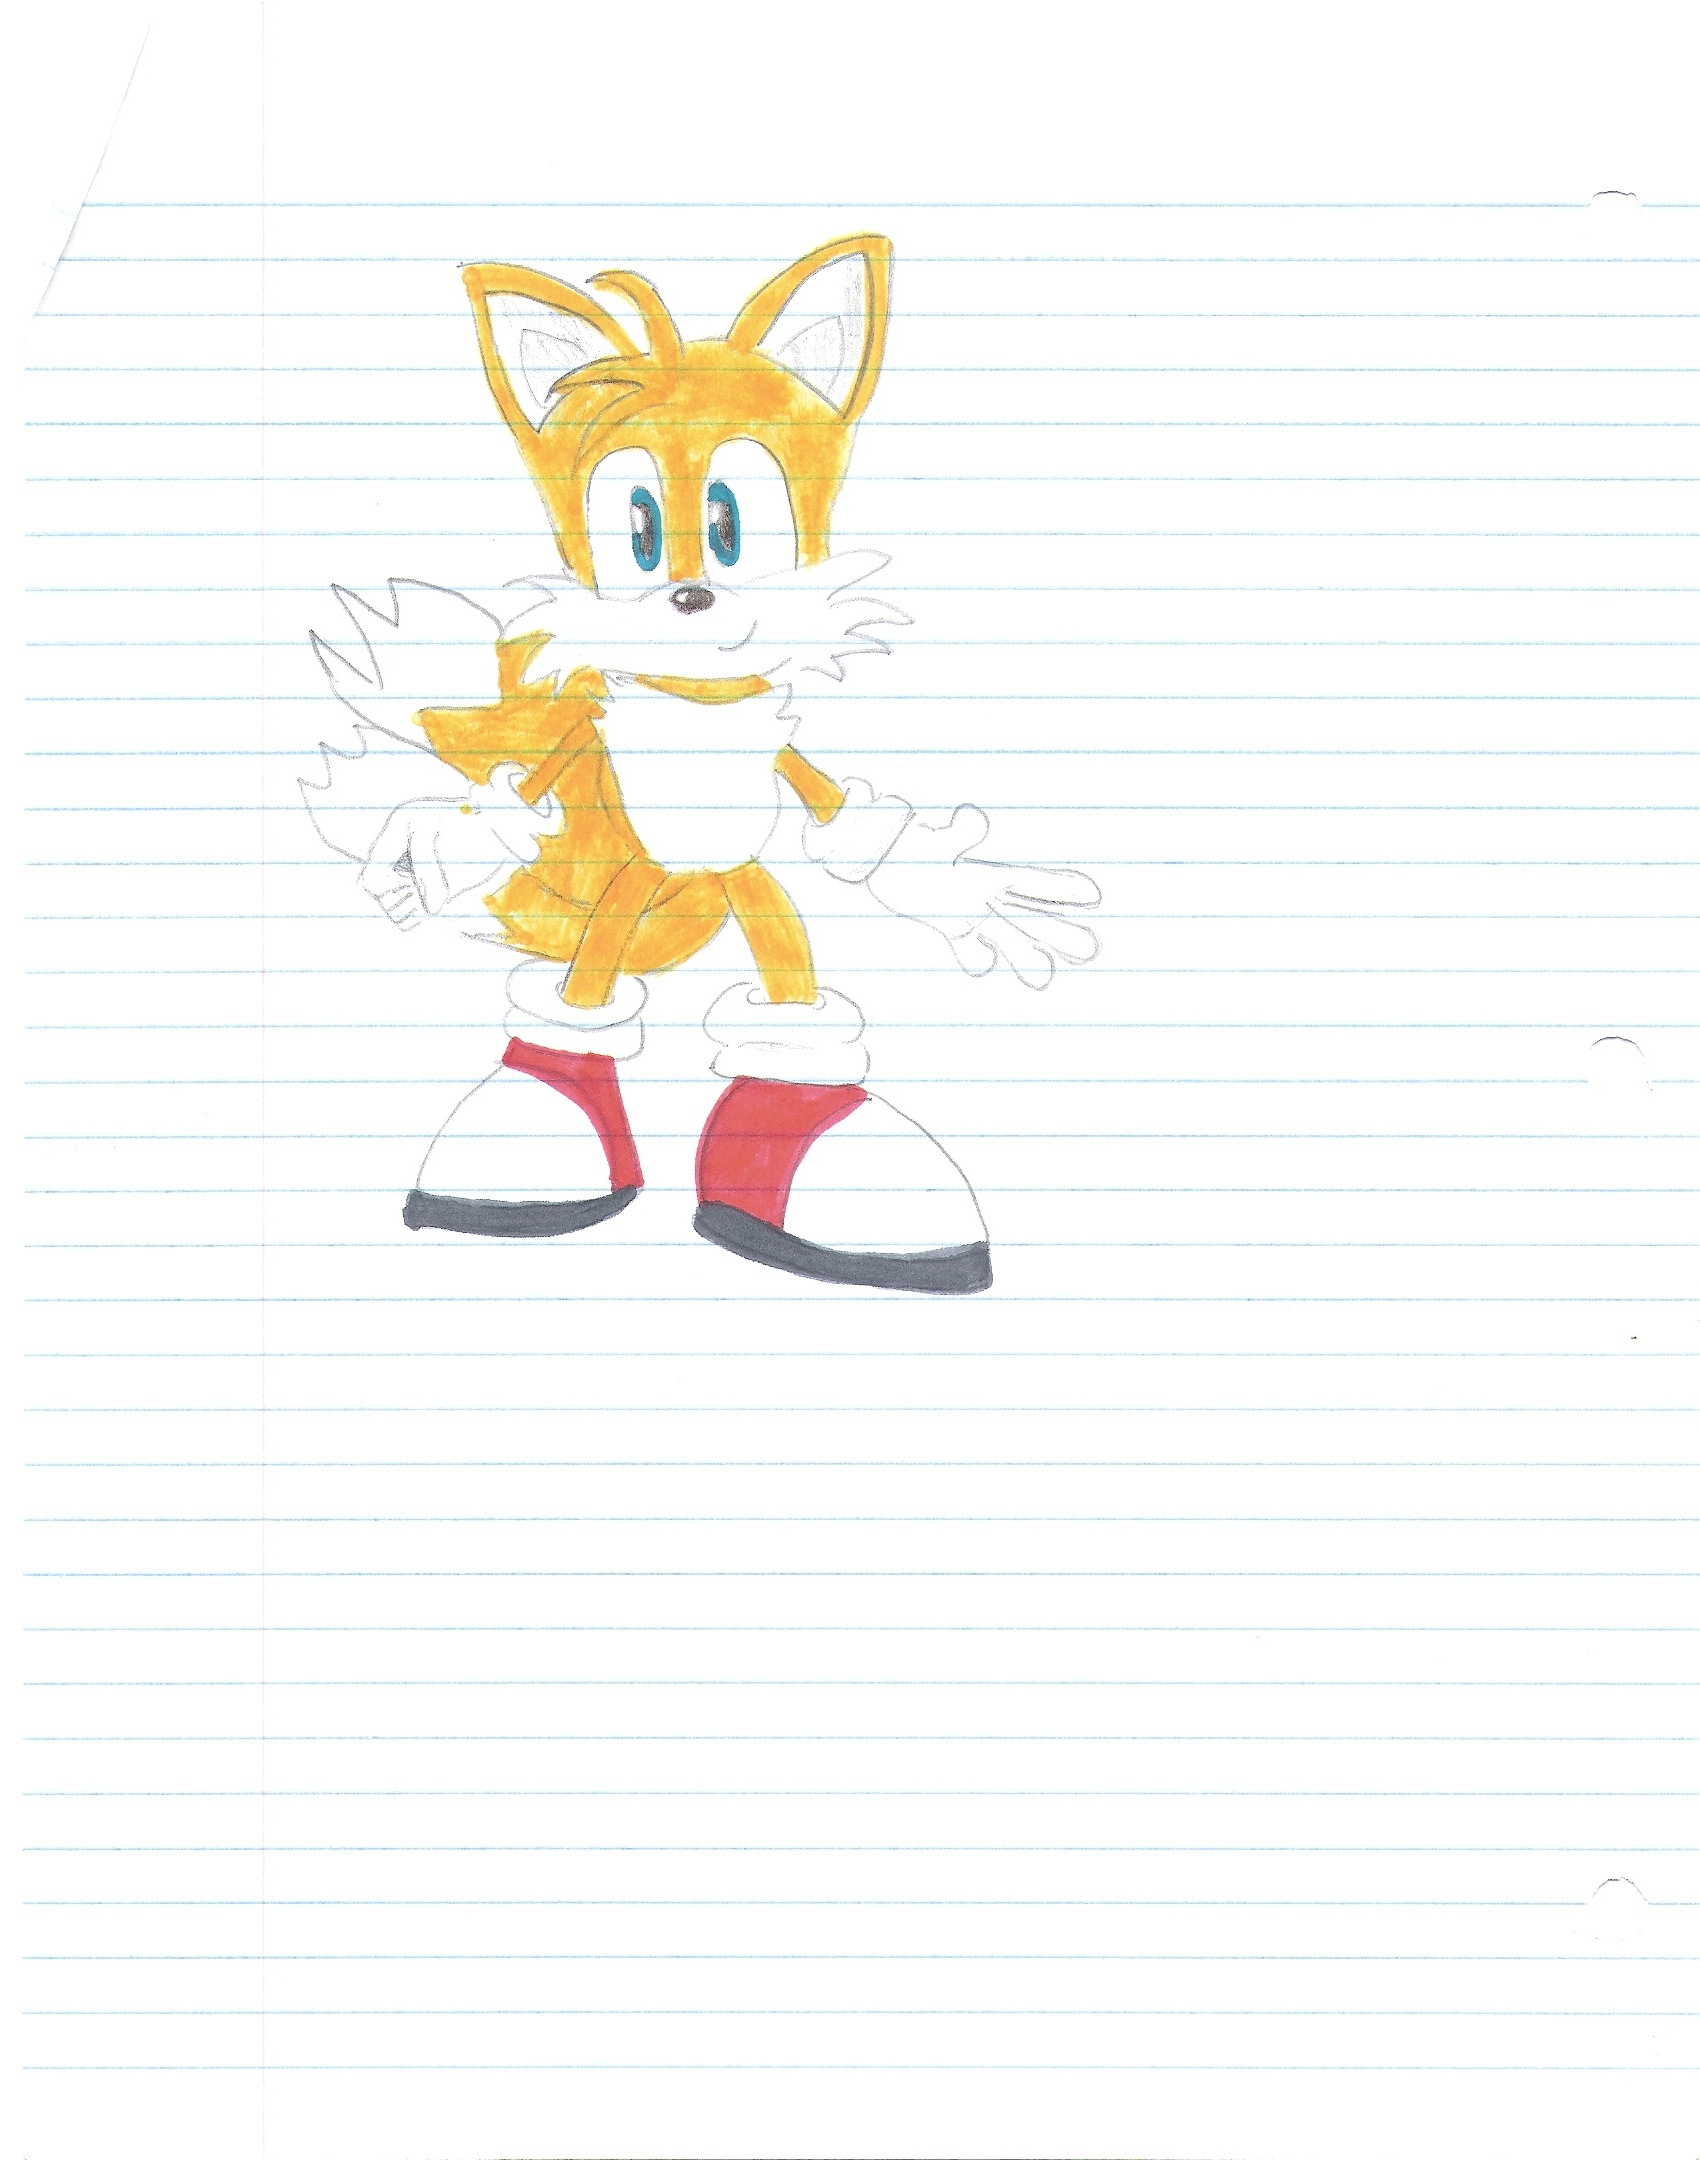 Tails by mickyD503